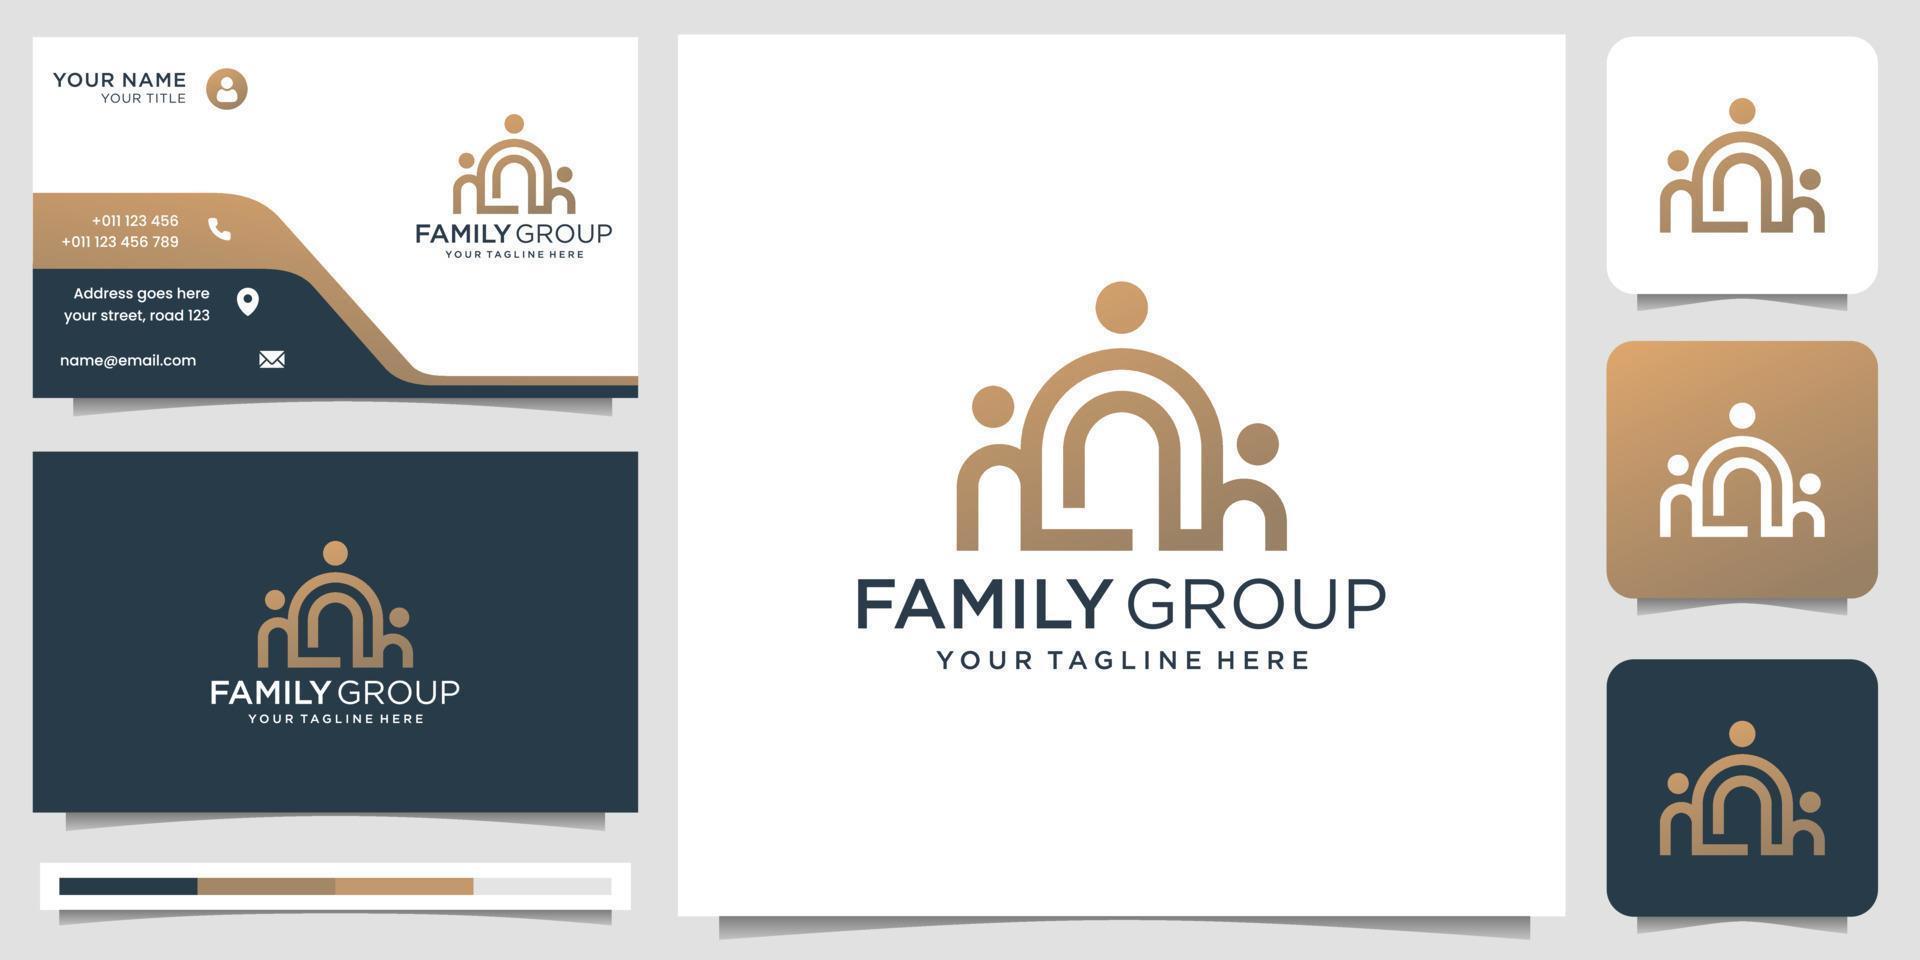 family group logo inspiration. social group logo,community people design with business card template vector